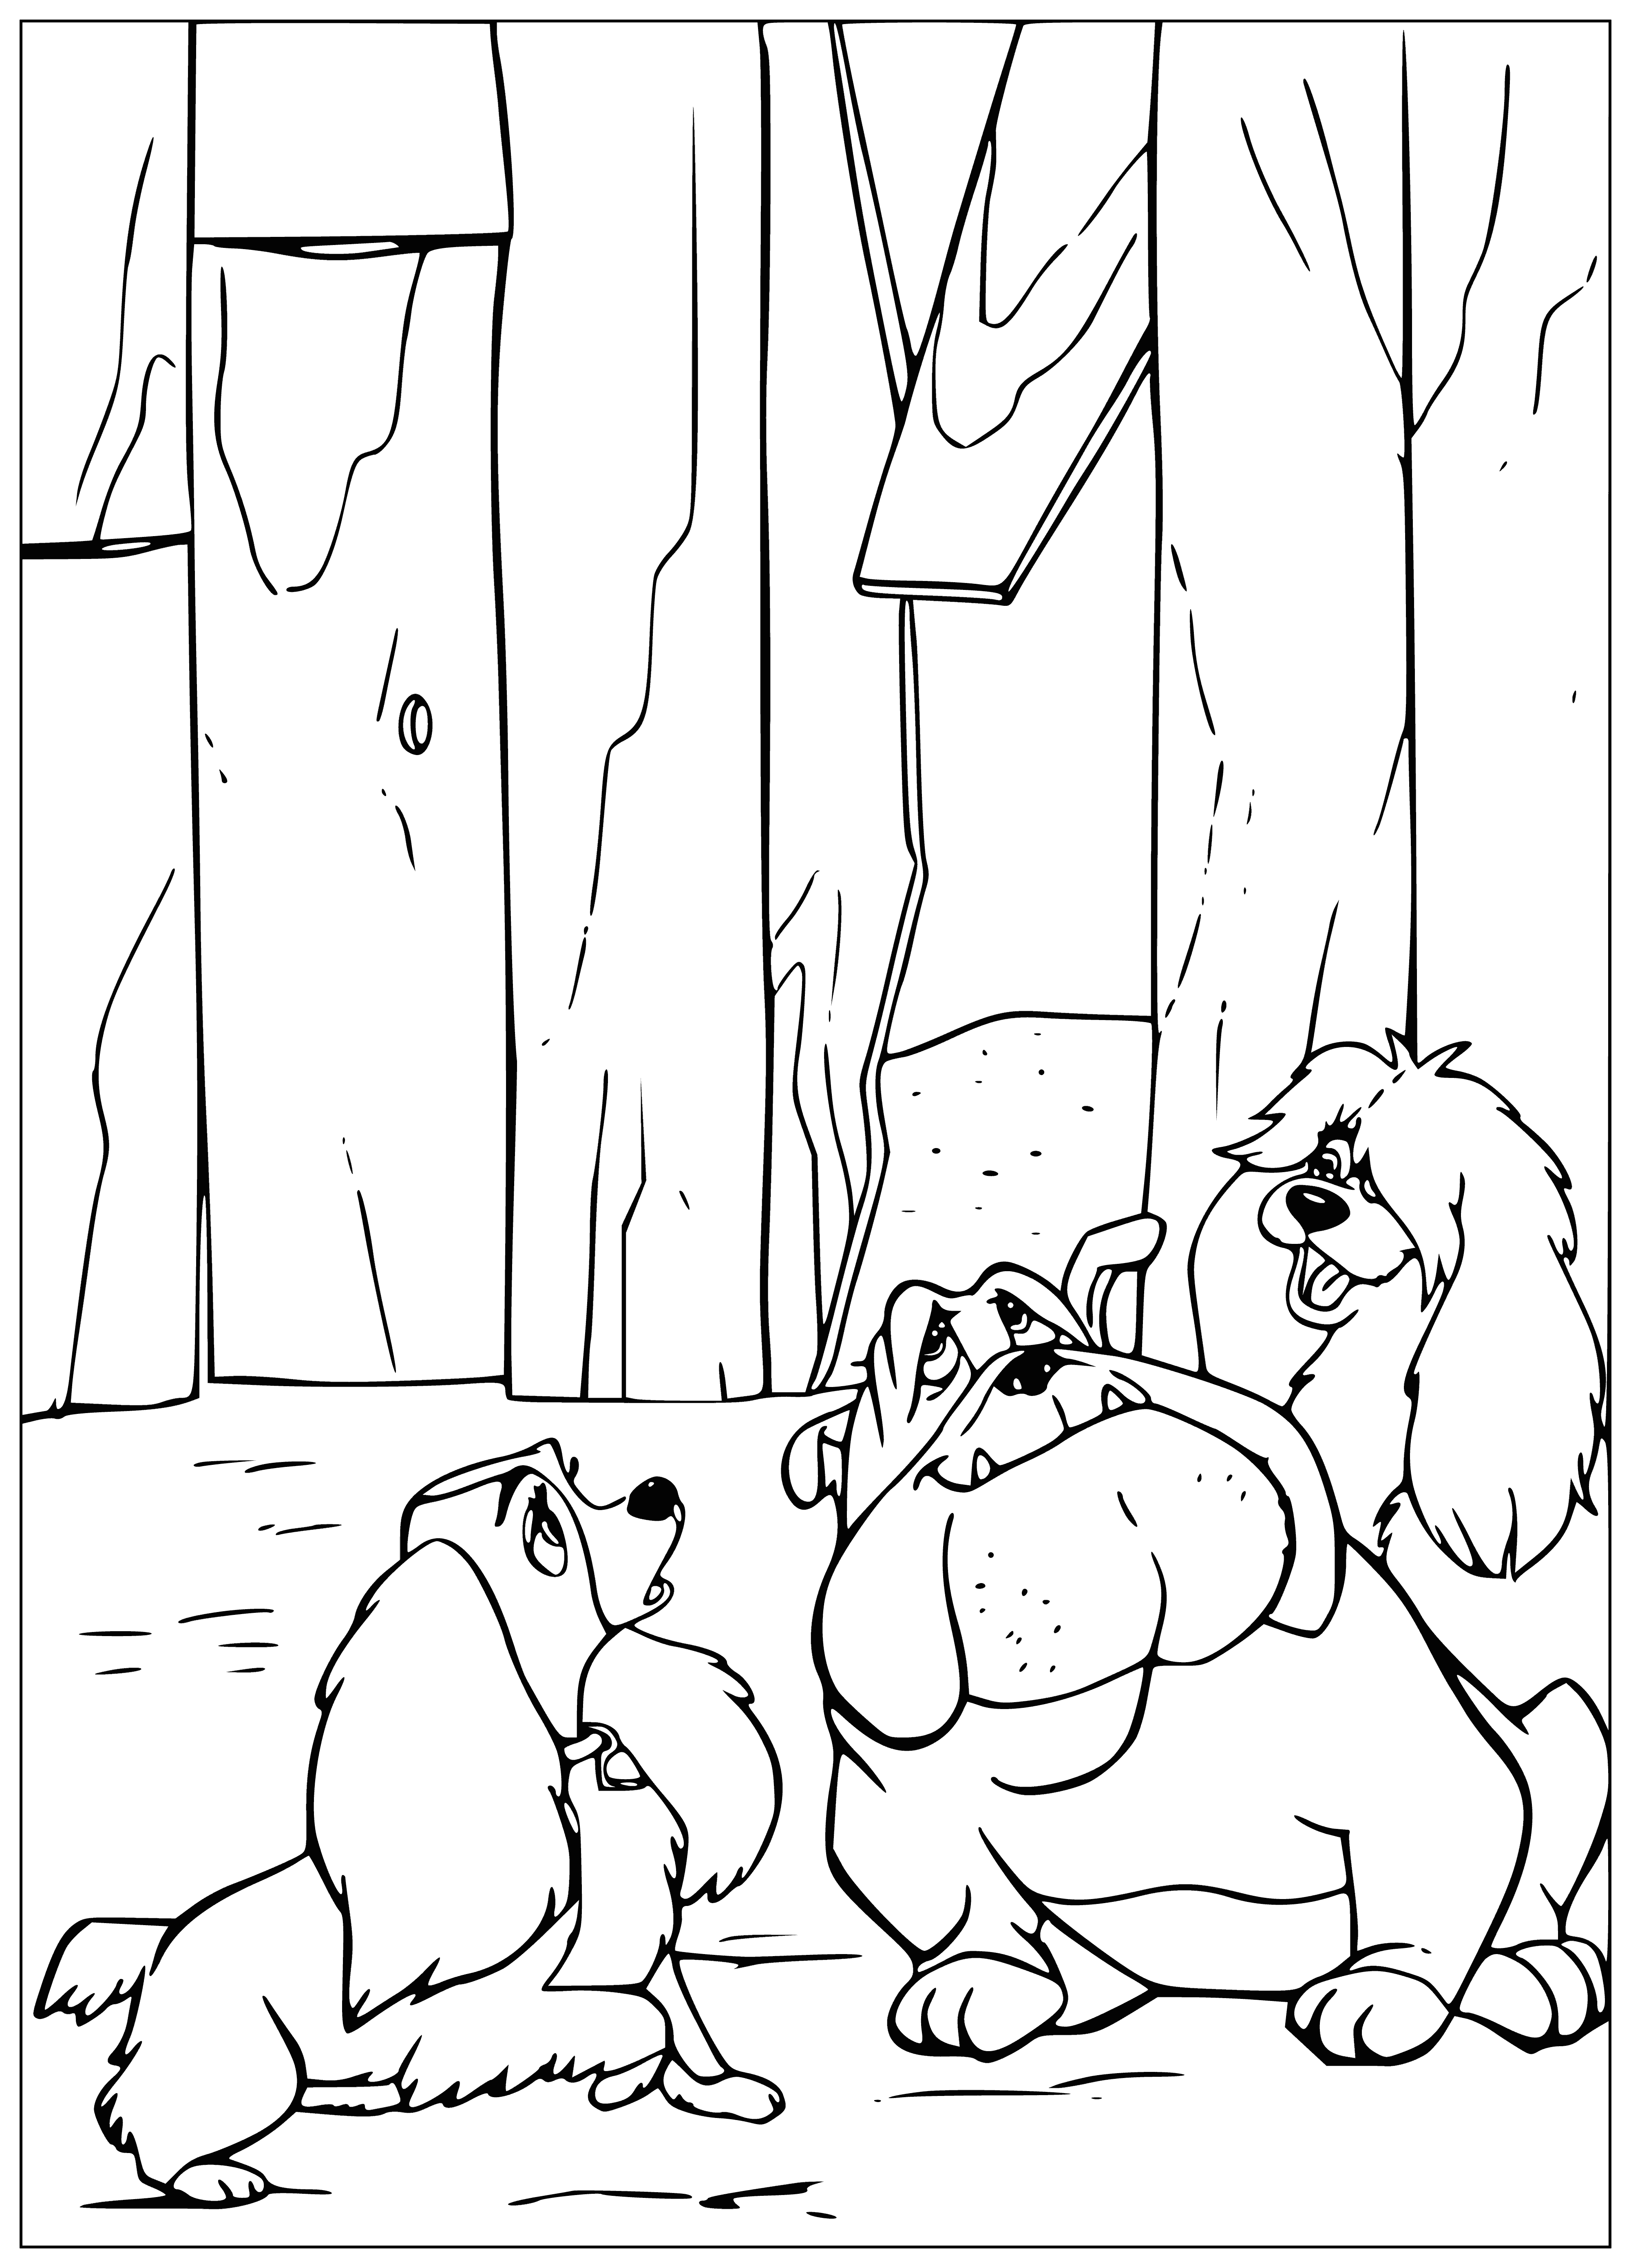 coloring page: Two stray dogs, the Lady white with black spots and the Tramp brown, gaze at each other with interest on a coloring page.